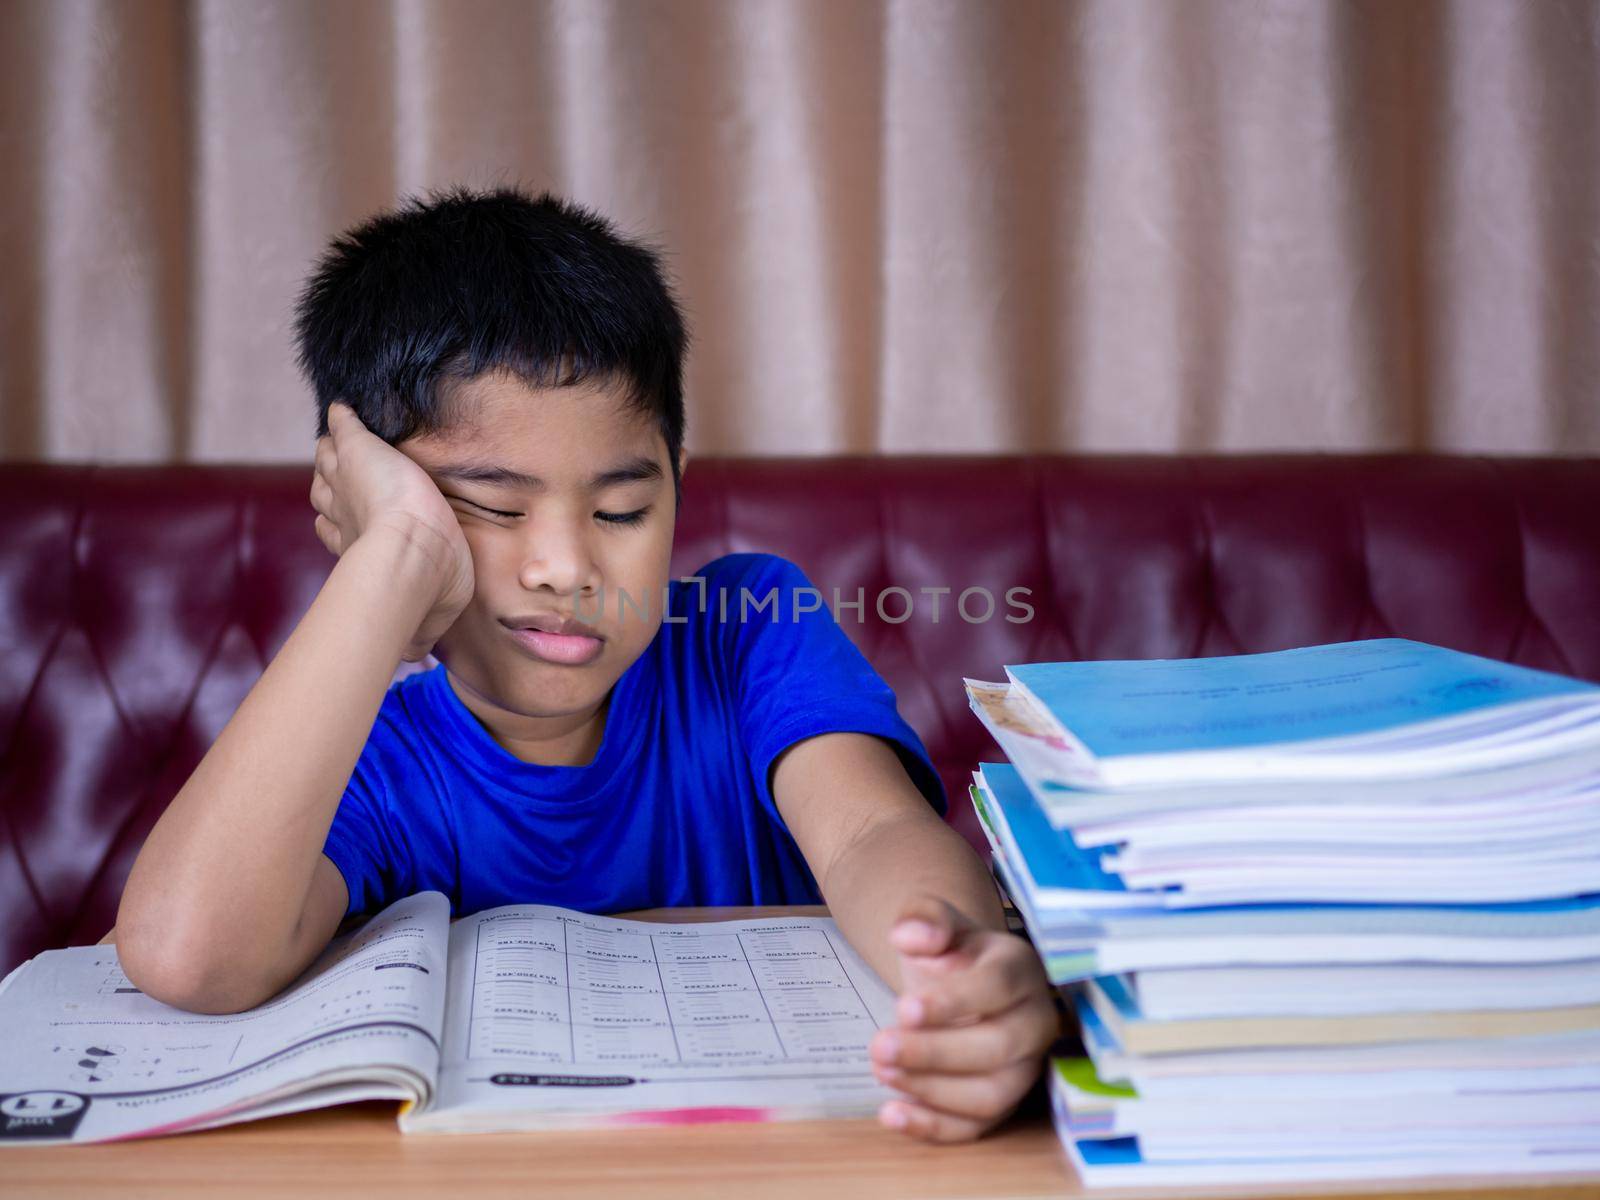 A boy is tired of reading a book on a wooden table. with a pile of books beside The background is a red sofa and cream curtains. by Unimages2527